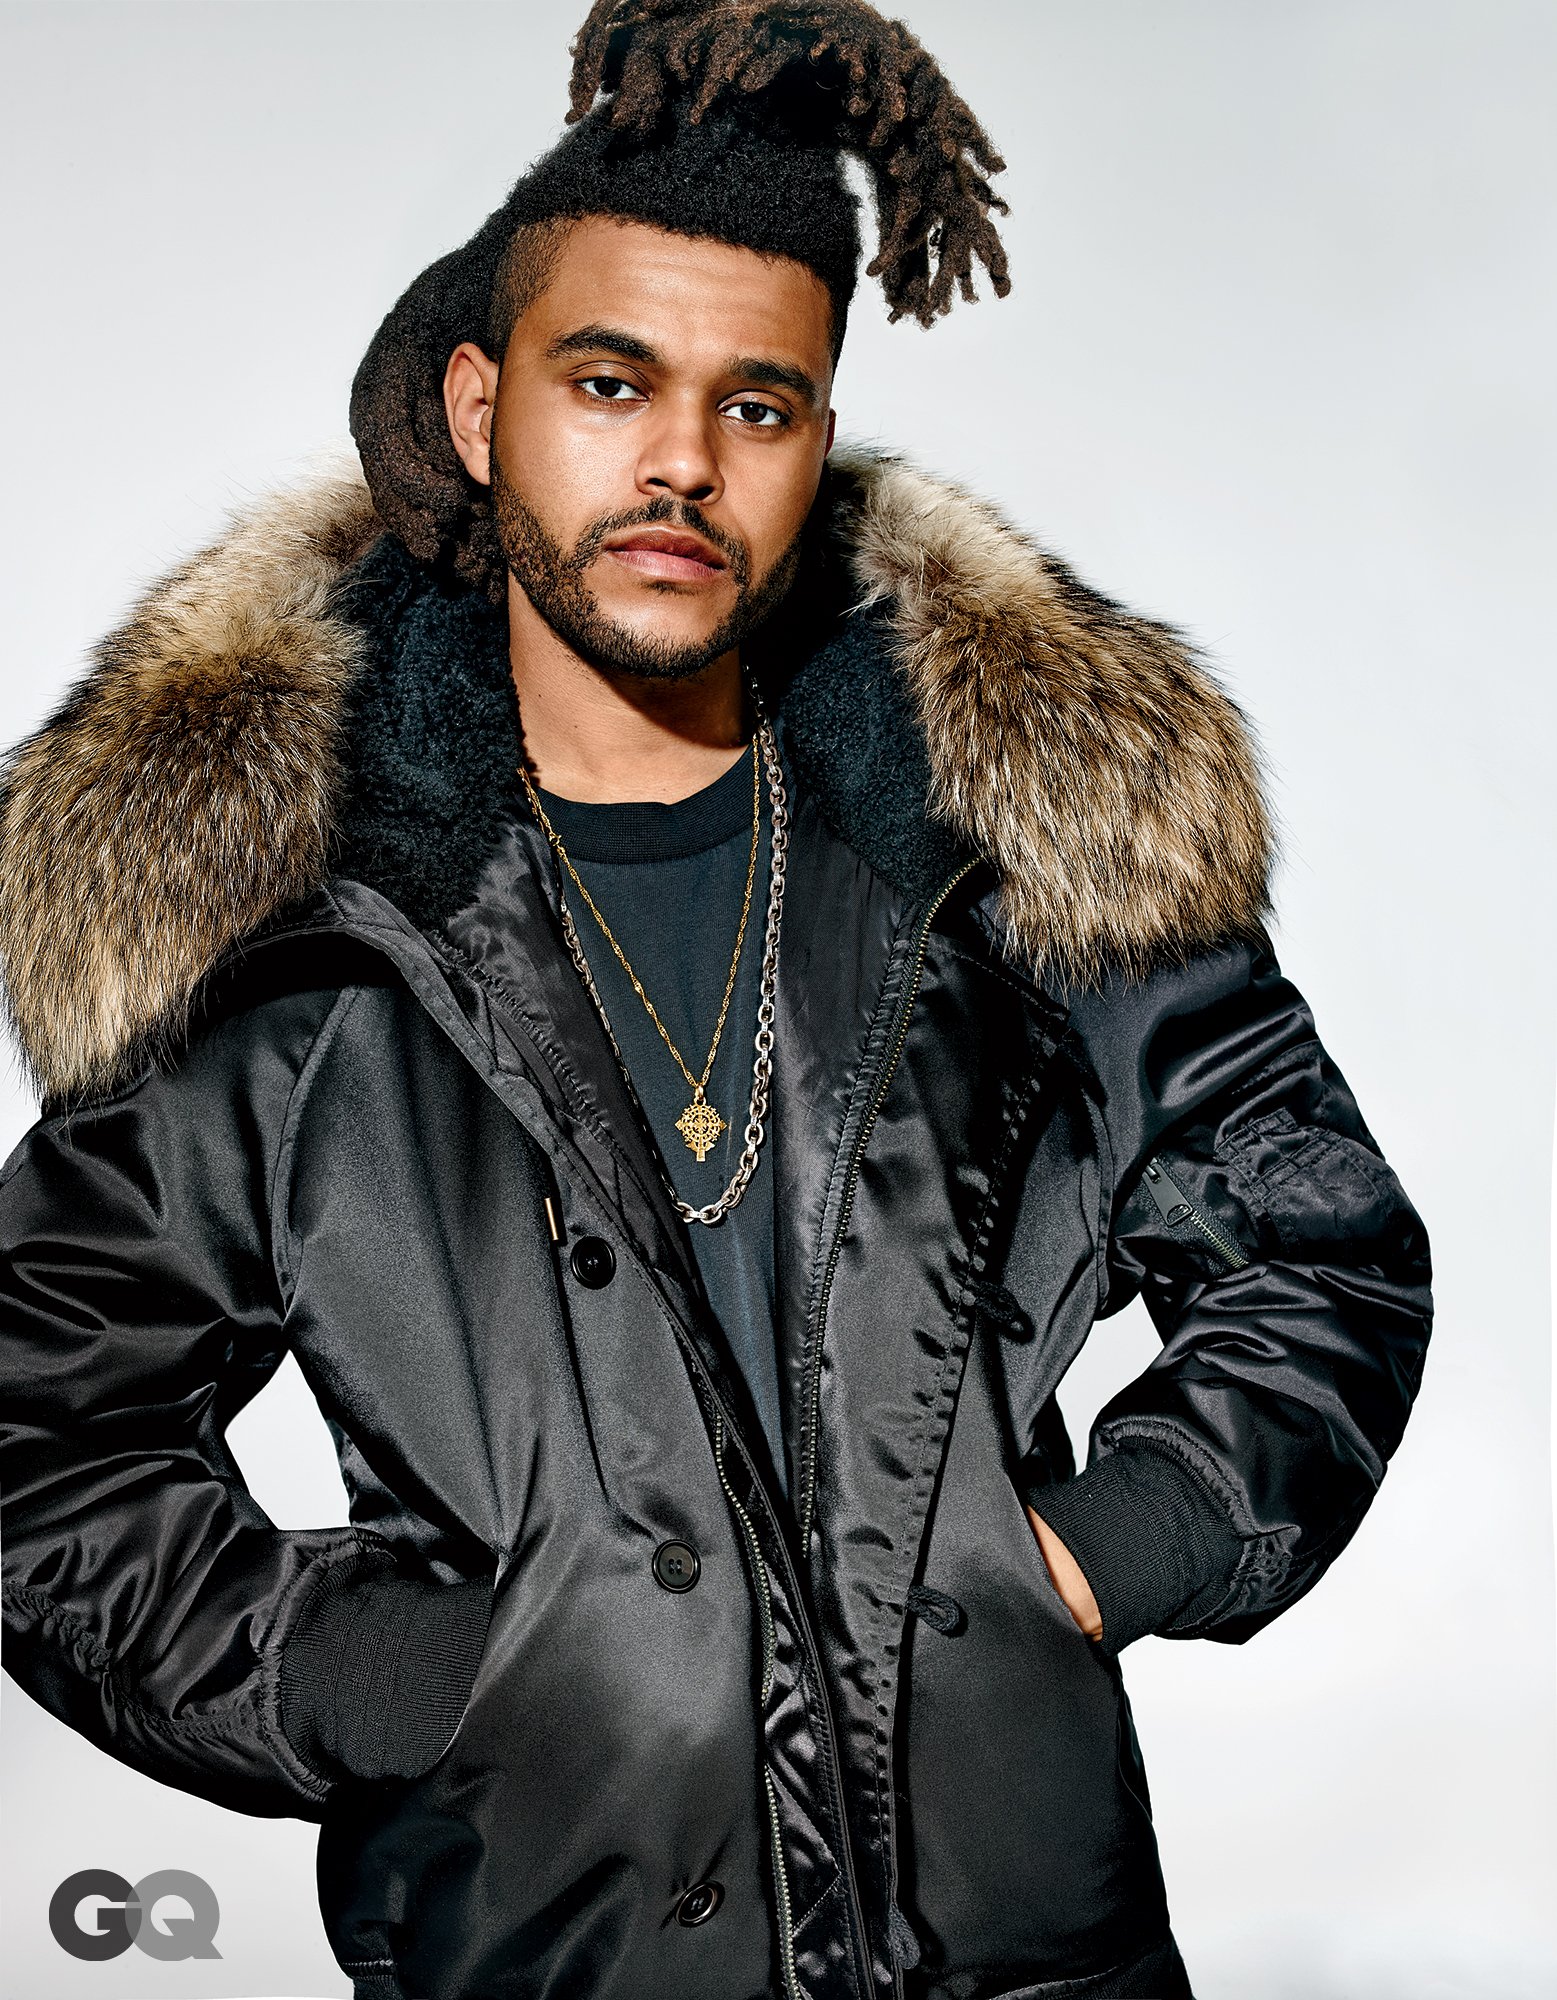 The Weeknd GQ September 2015 Shoot Kanye West Yeezy Adidas Collection 003